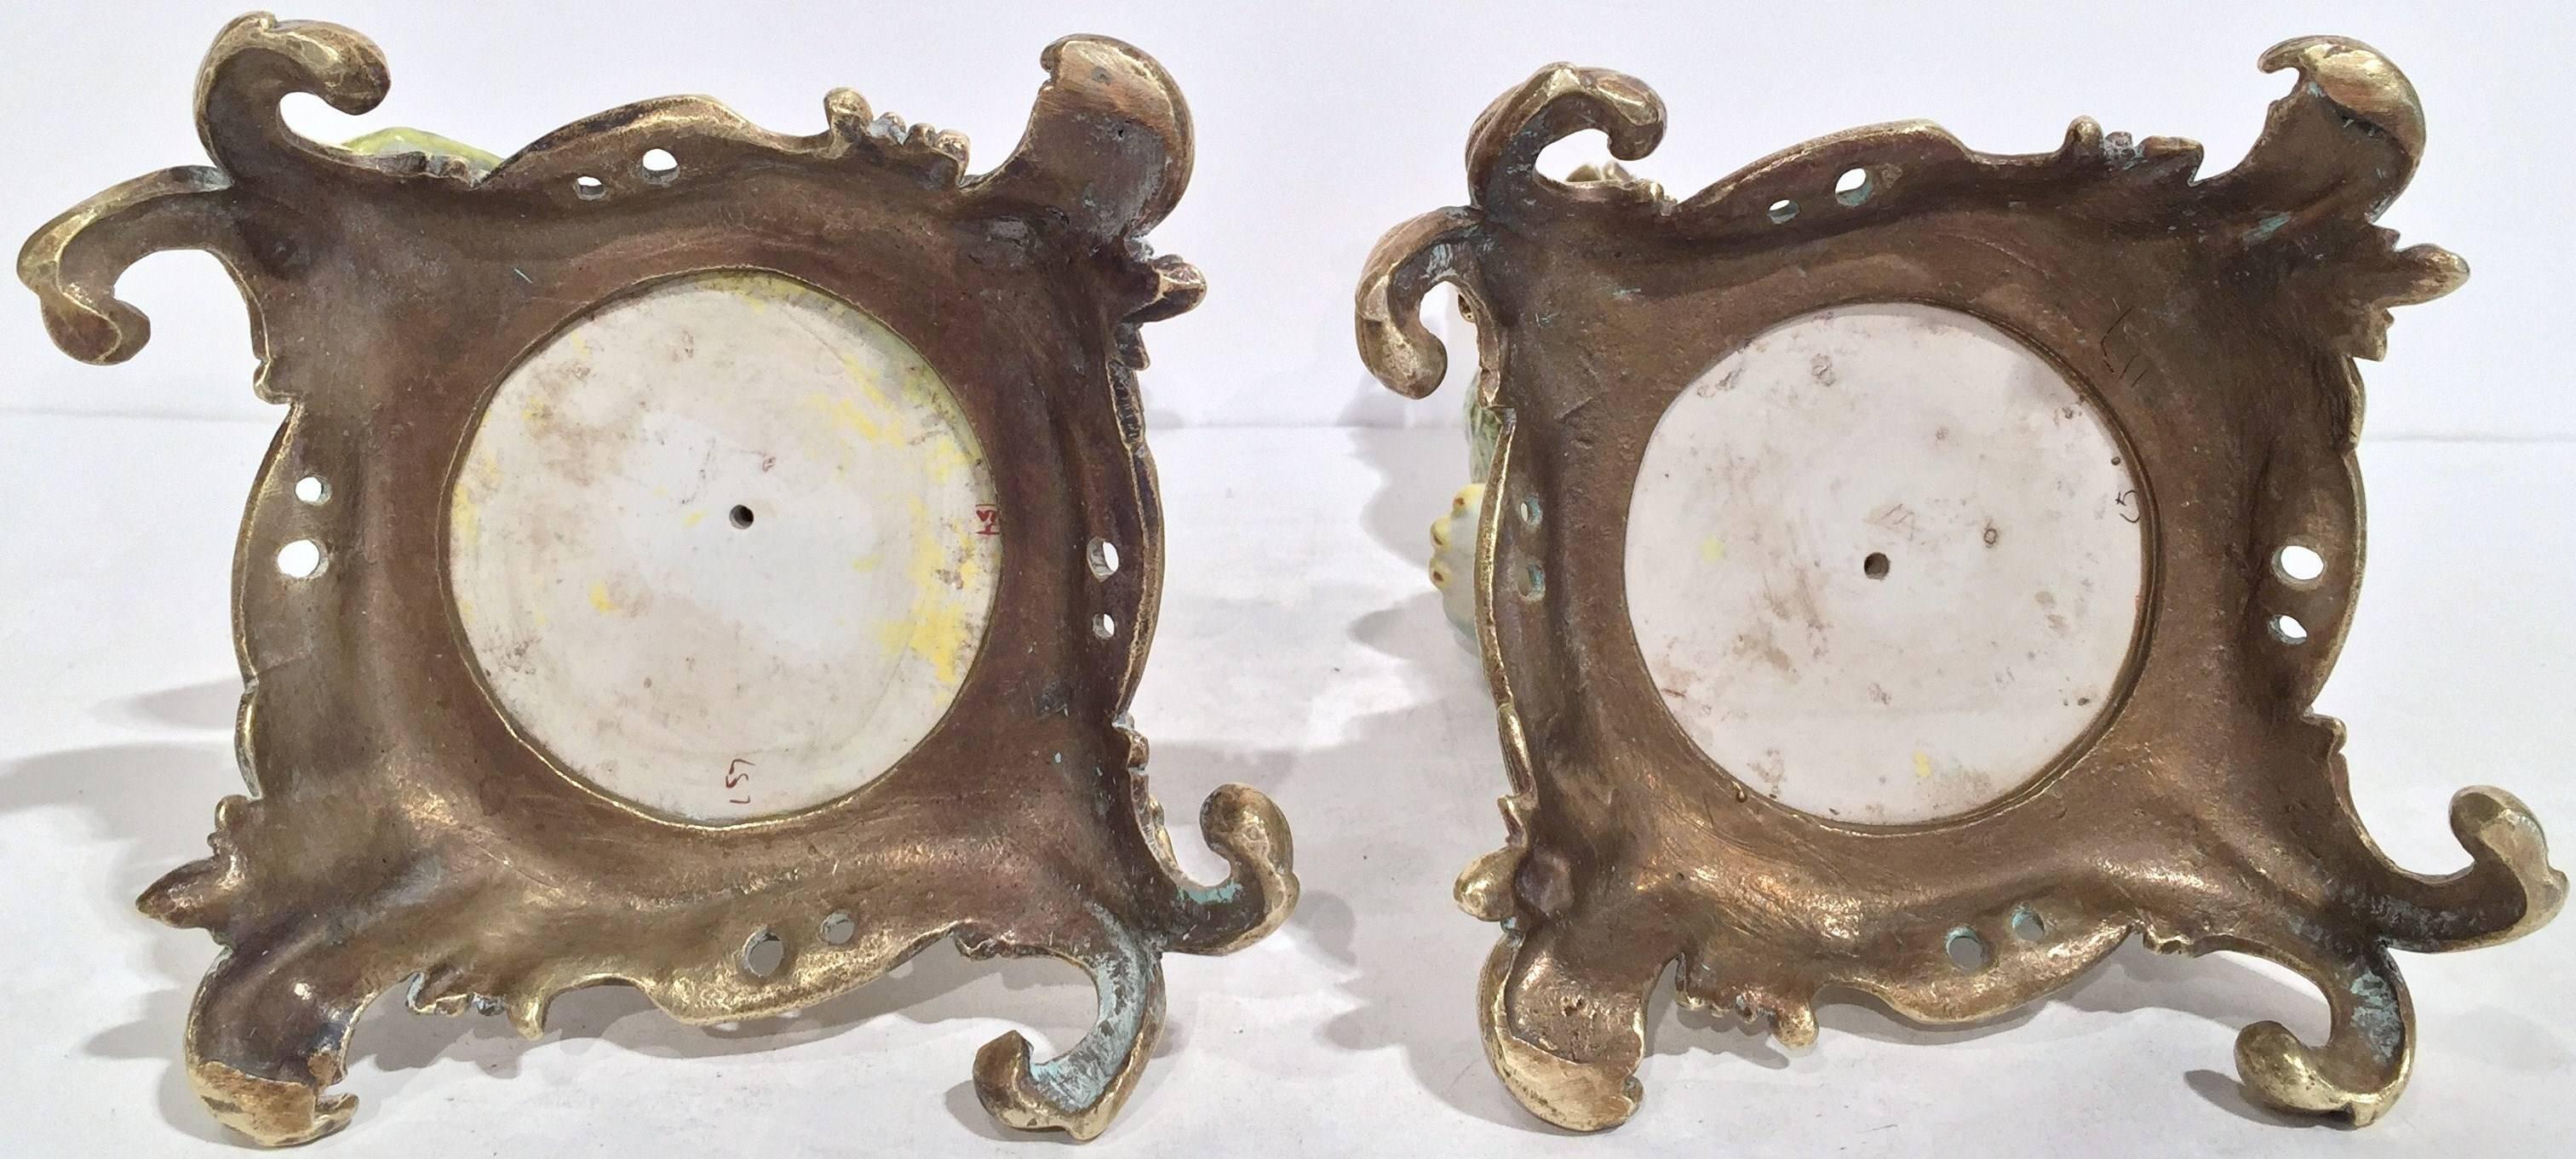 Pair of Antique Faience Candle Holders with Parrots on Bronze Bases  2